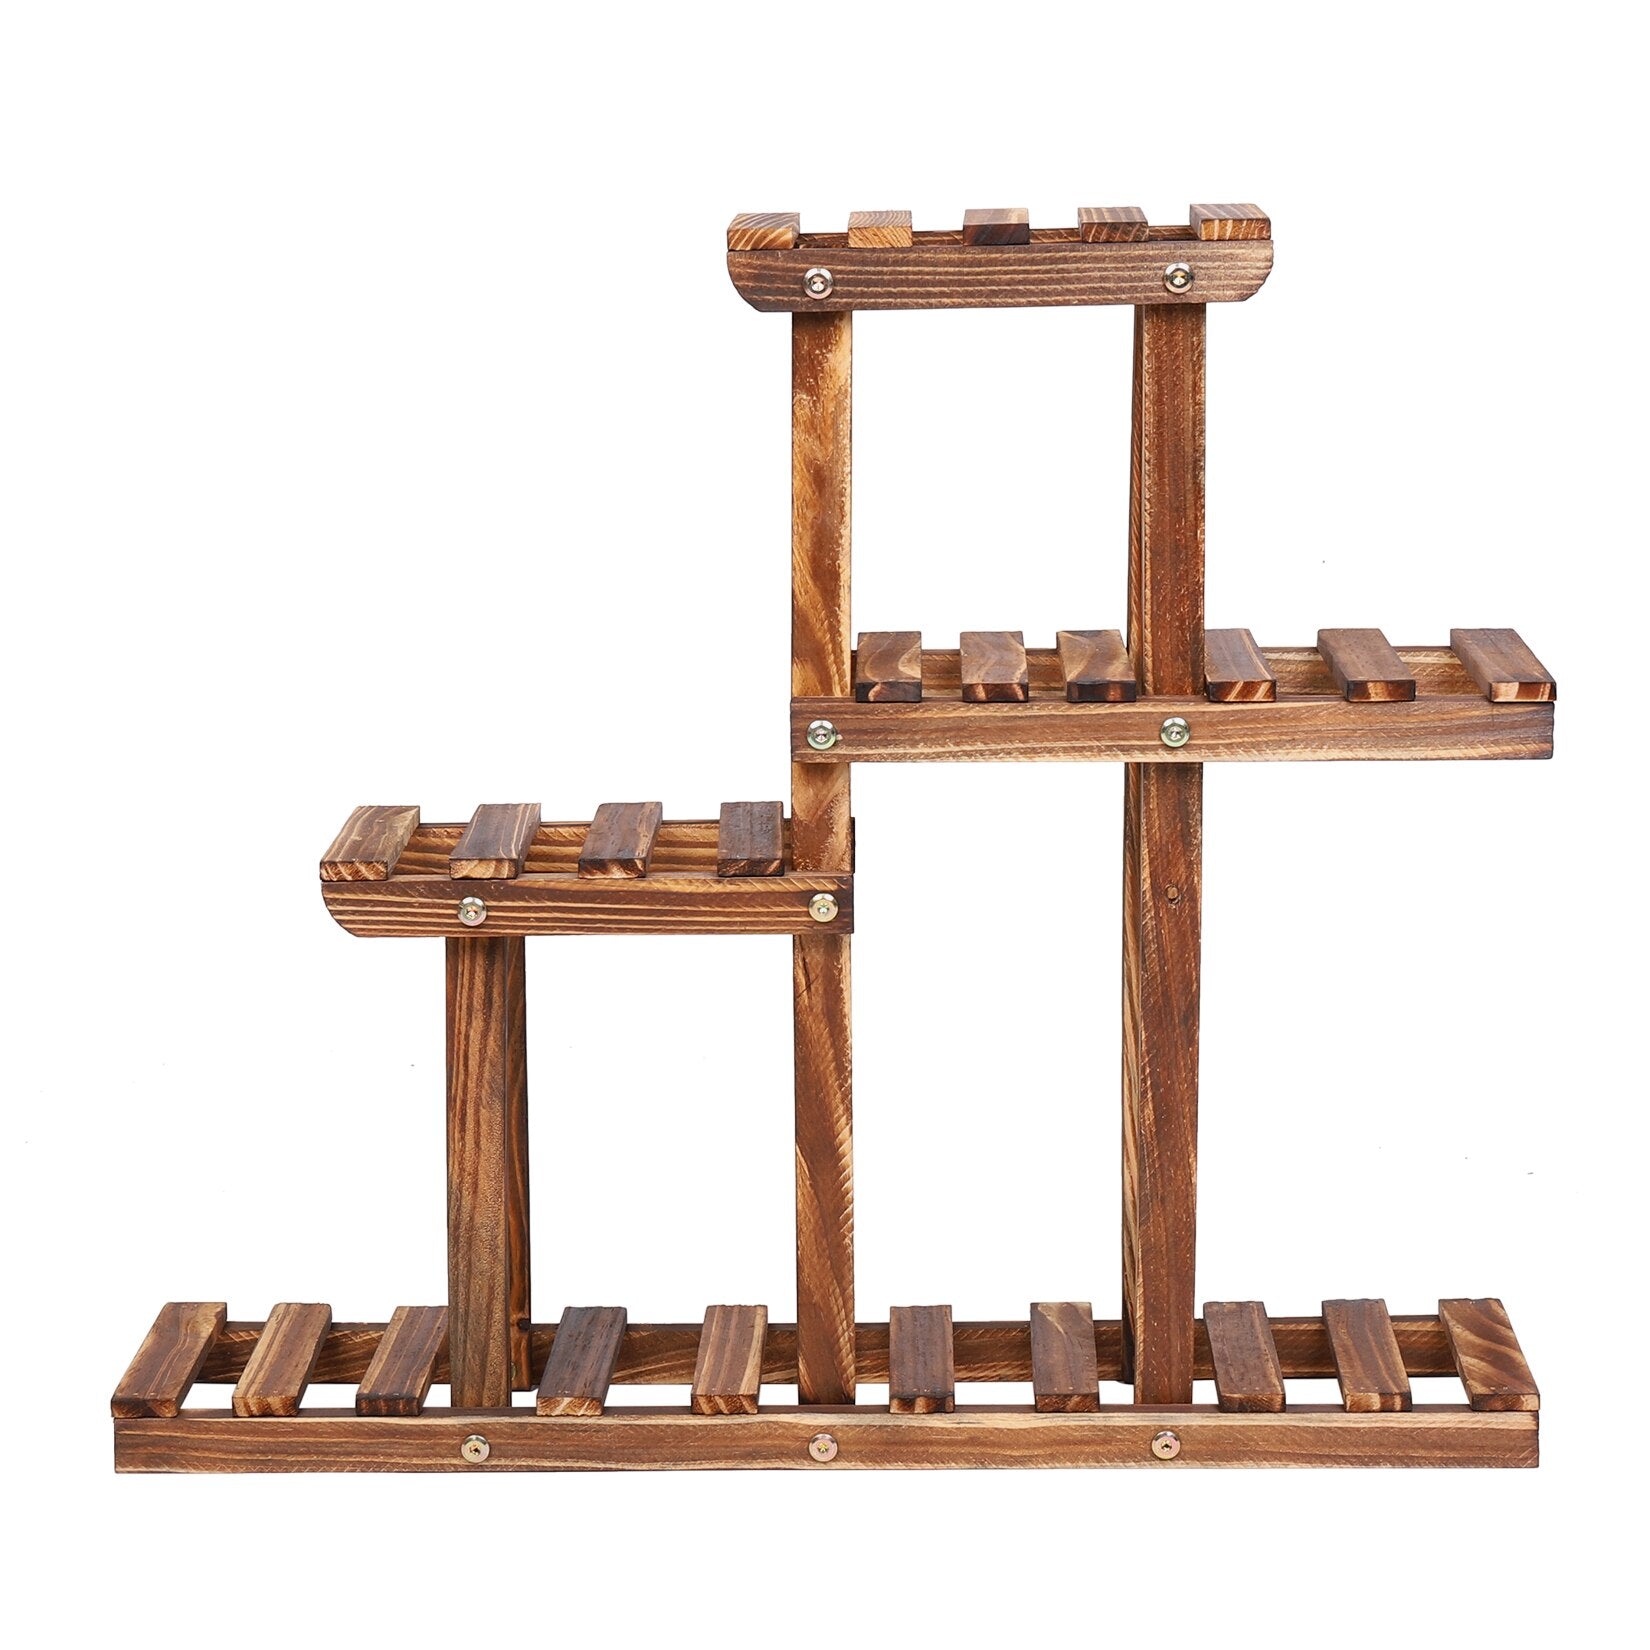 Solid Wood Plant Pot Stand for Indoor and Outdoor SKU 35010